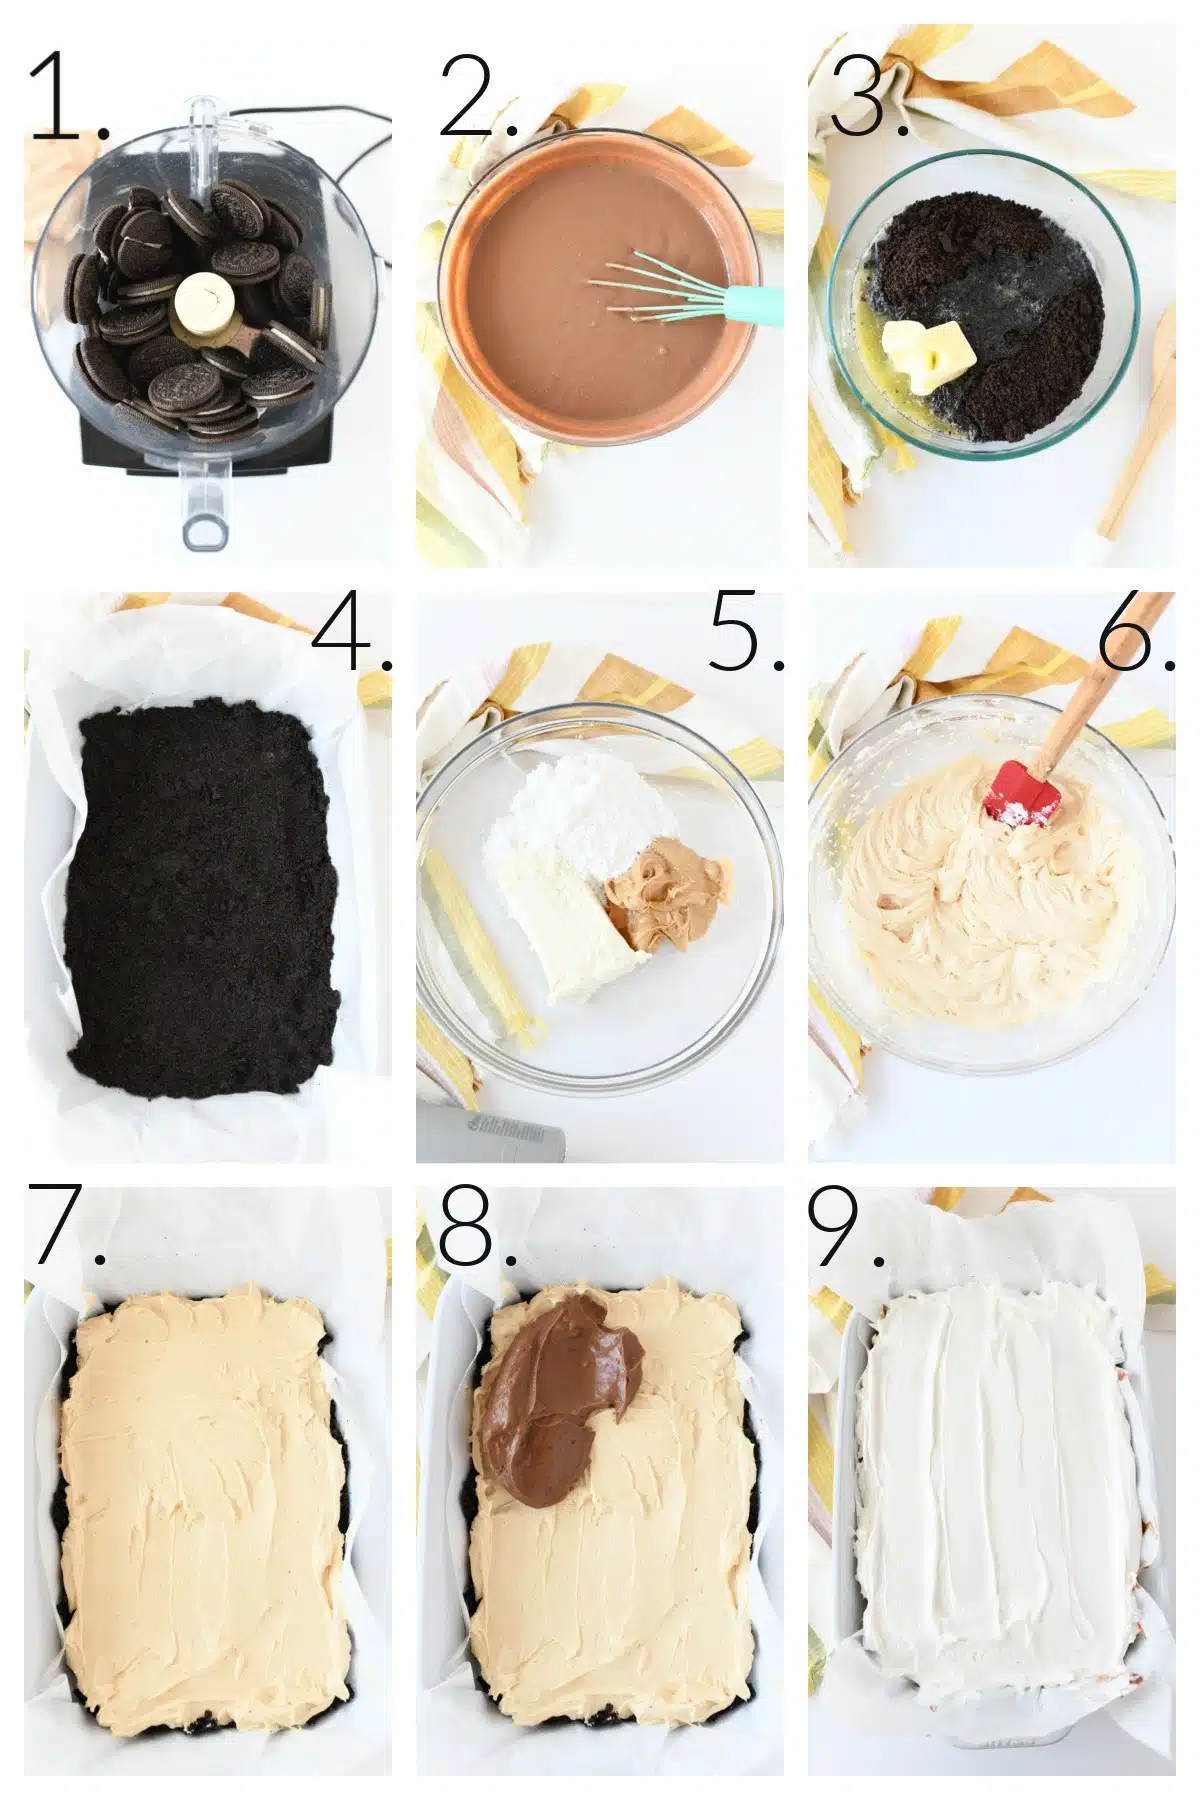 How to Make Peanut Butter Chocolate Lasagna. A 9 block grid on the steps to make this no-bake desserts.